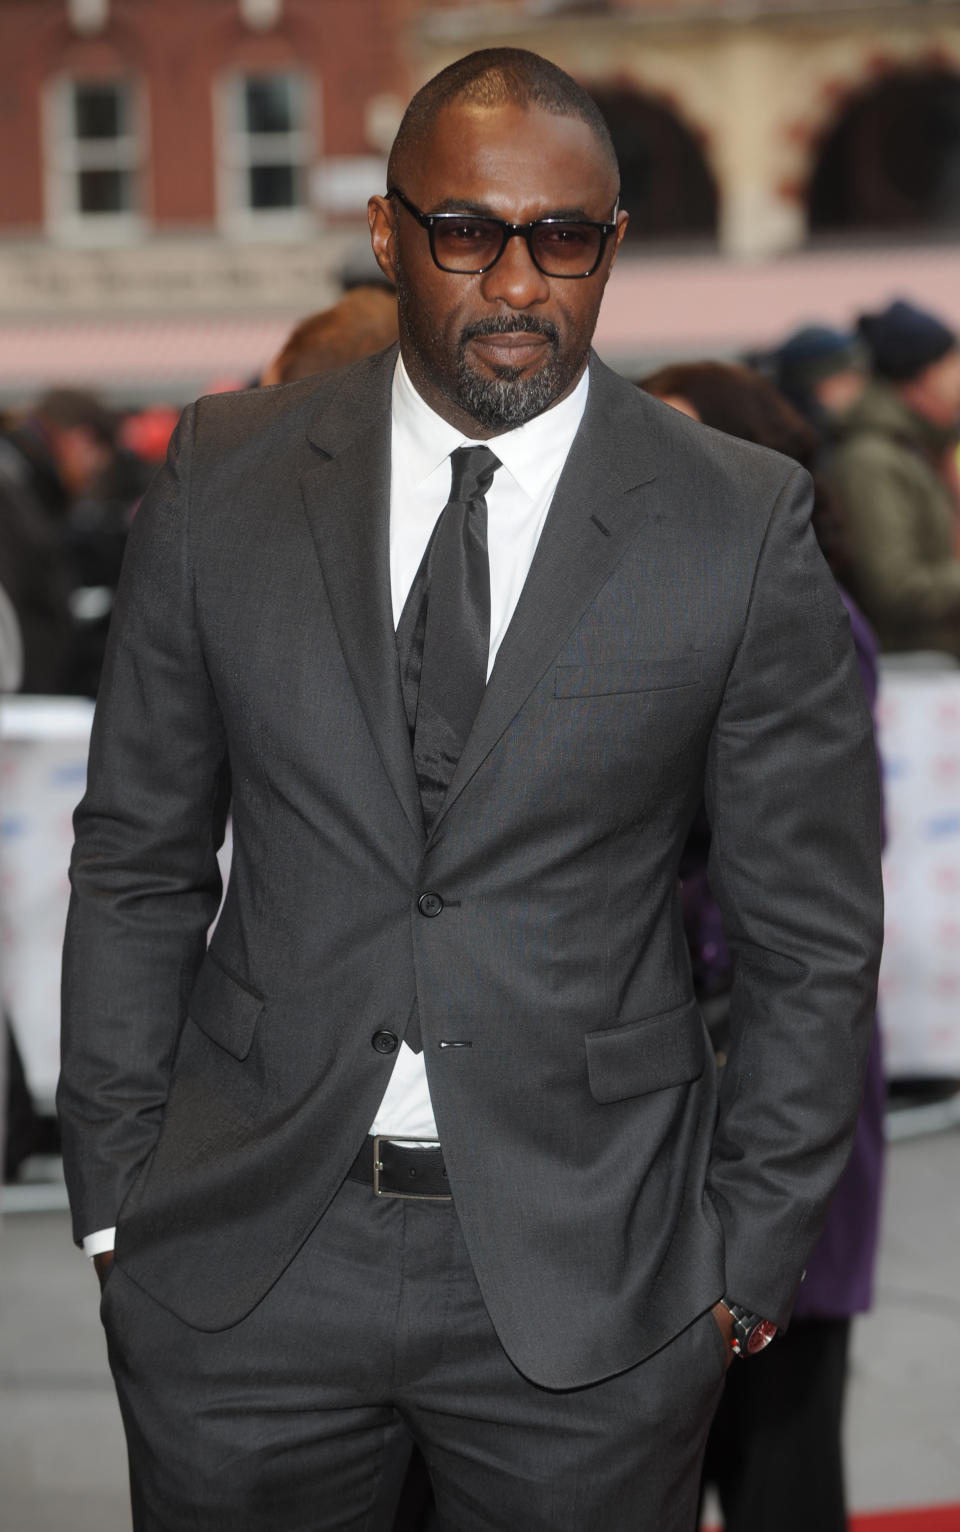 LONDON, UNITED KINGDOM - MARCH 26: Idris Elba attends the Prince's Trust Celebrate Success Awards at Odeon Leicester Square on March 26, 2013 in London, England. (Photo by Stuart C. Wilson/Getty Images)